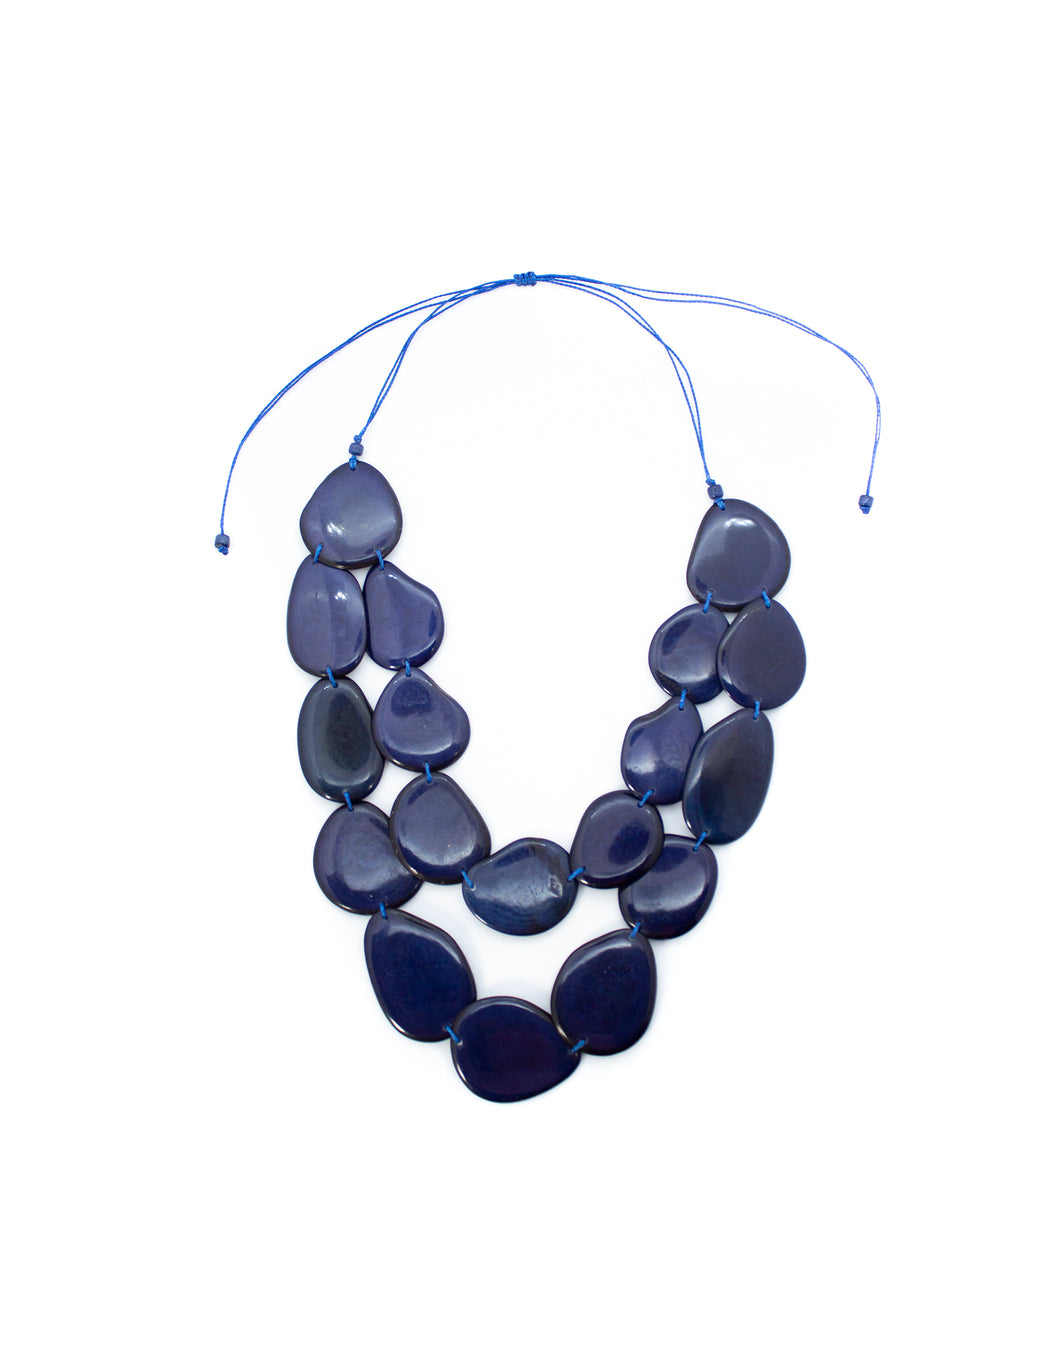 Tagua Nut 2 Row Necklaces * variants